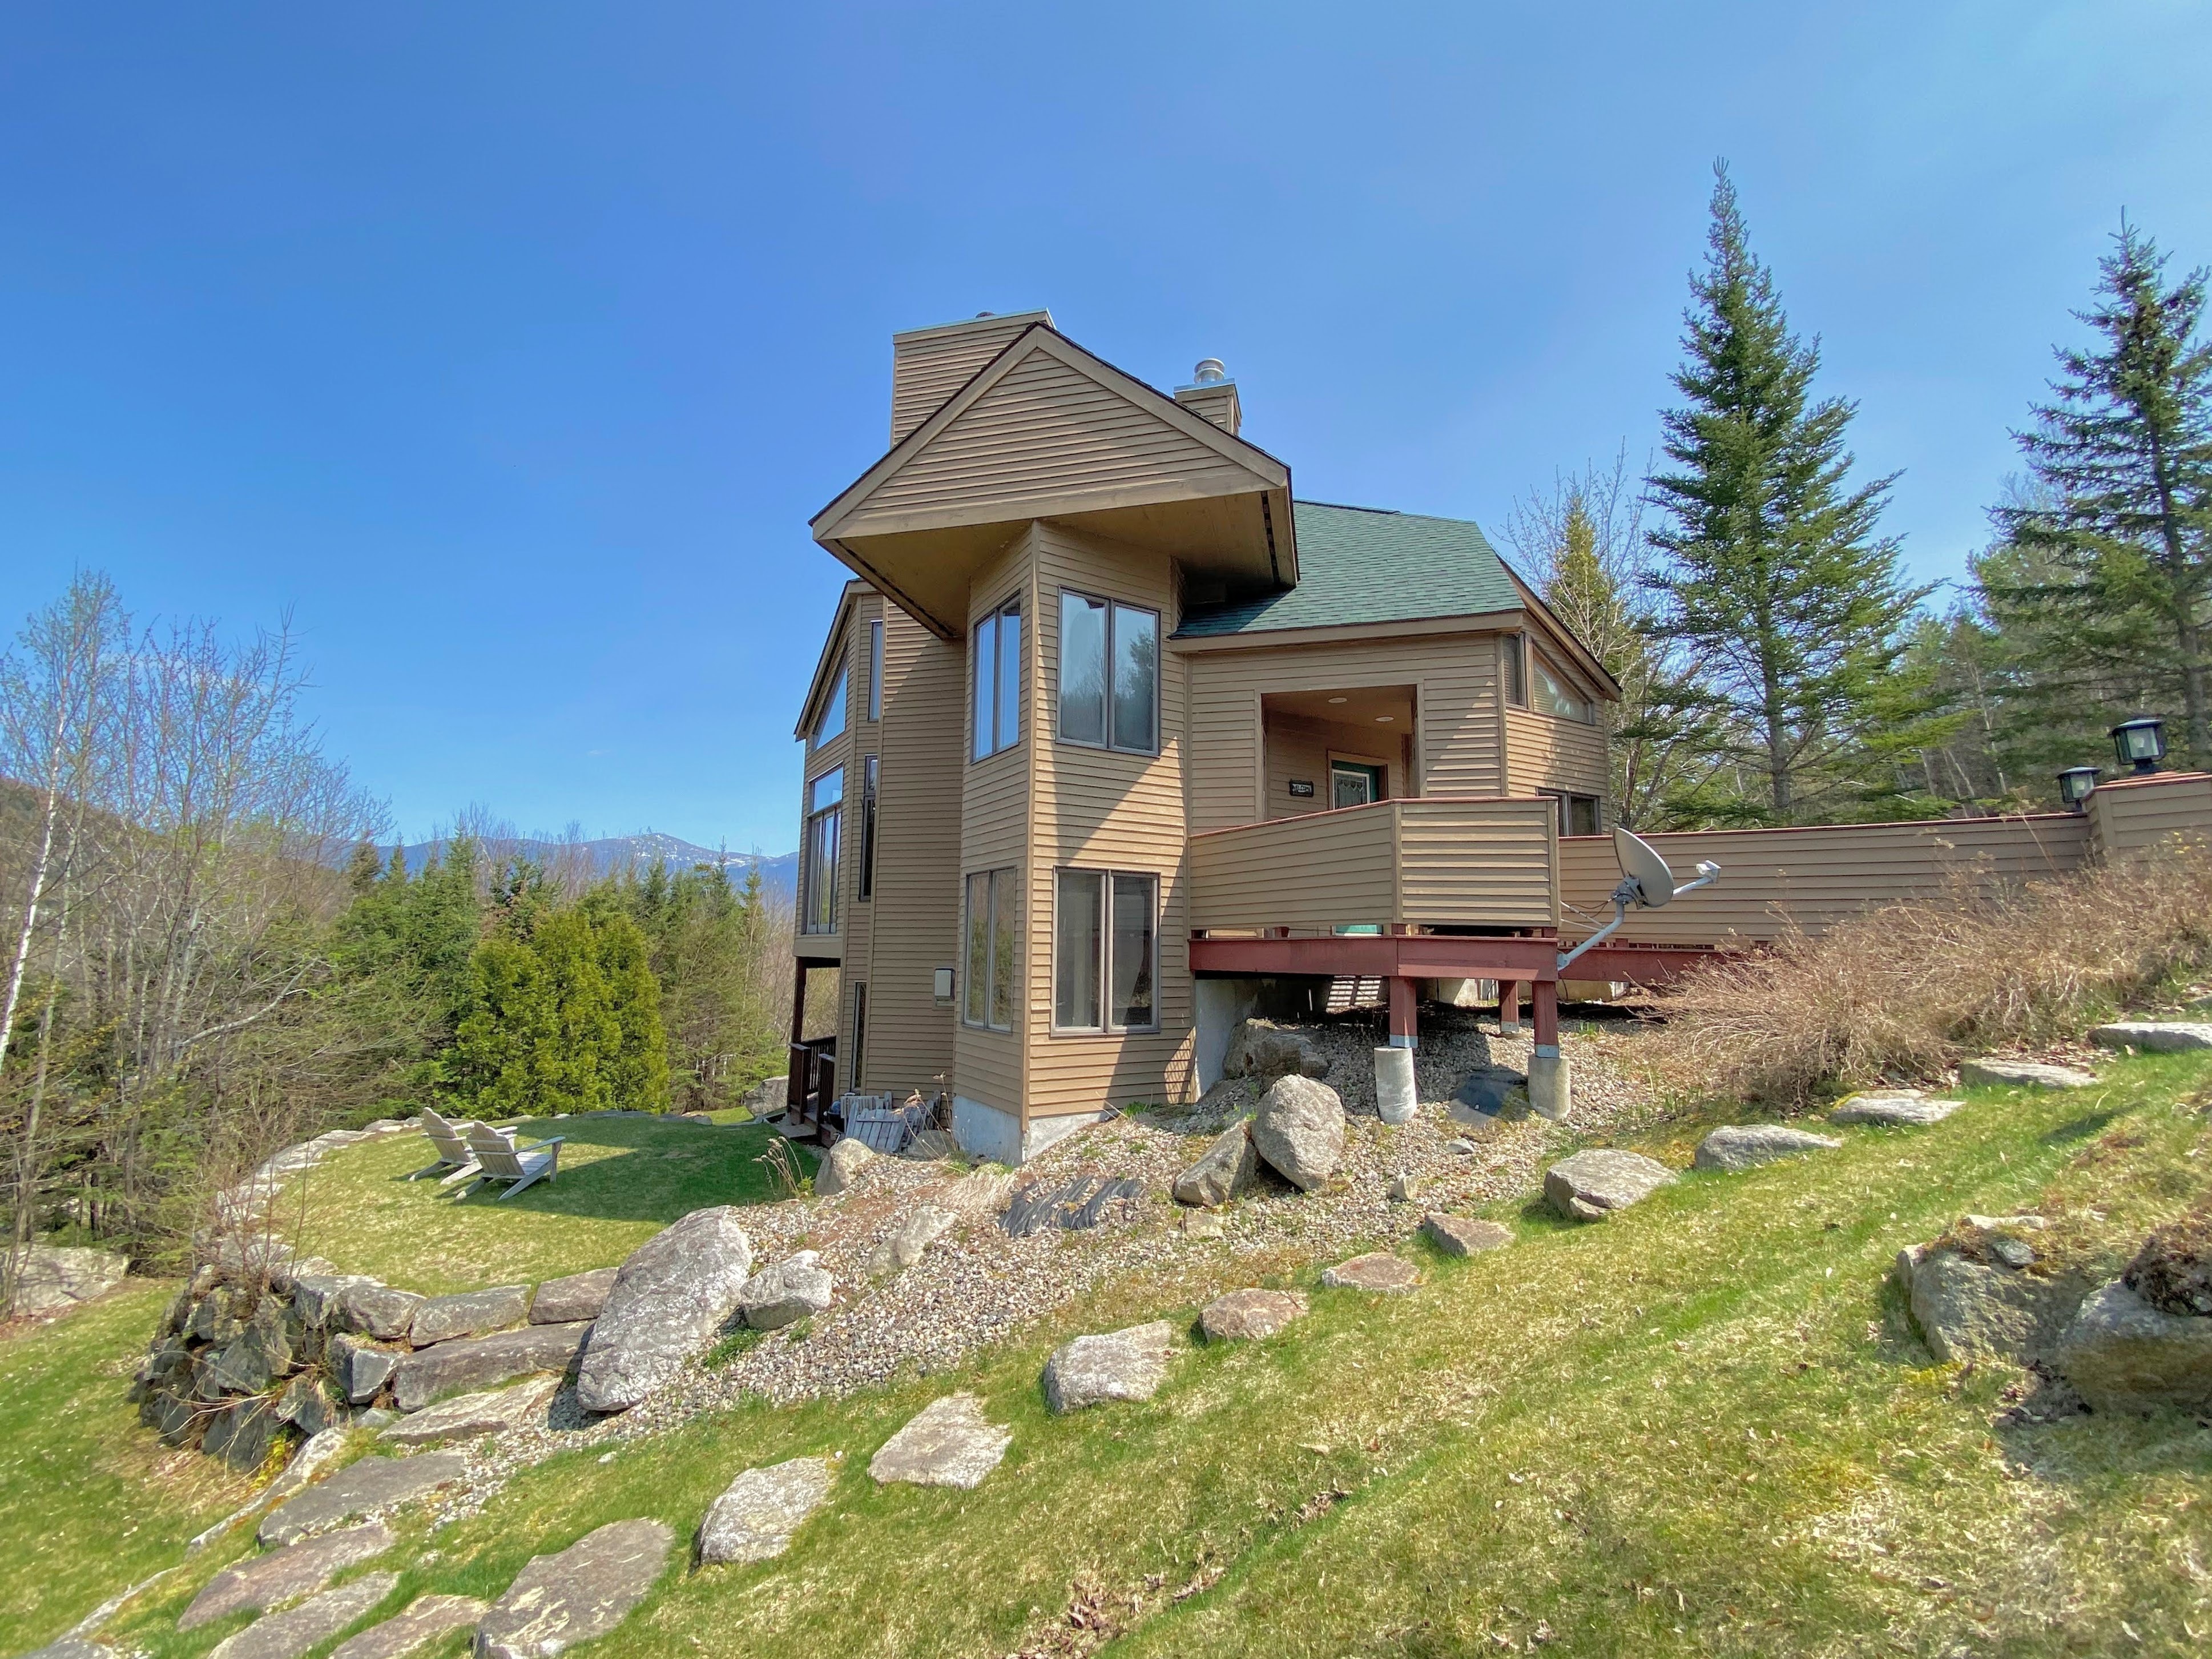 Located in the sought after development of Crawford Ridge, a short walk from the famous ski trail of Bretton Woods, this beautiful home features stunning views of Mount Washington and the Presidential Range.